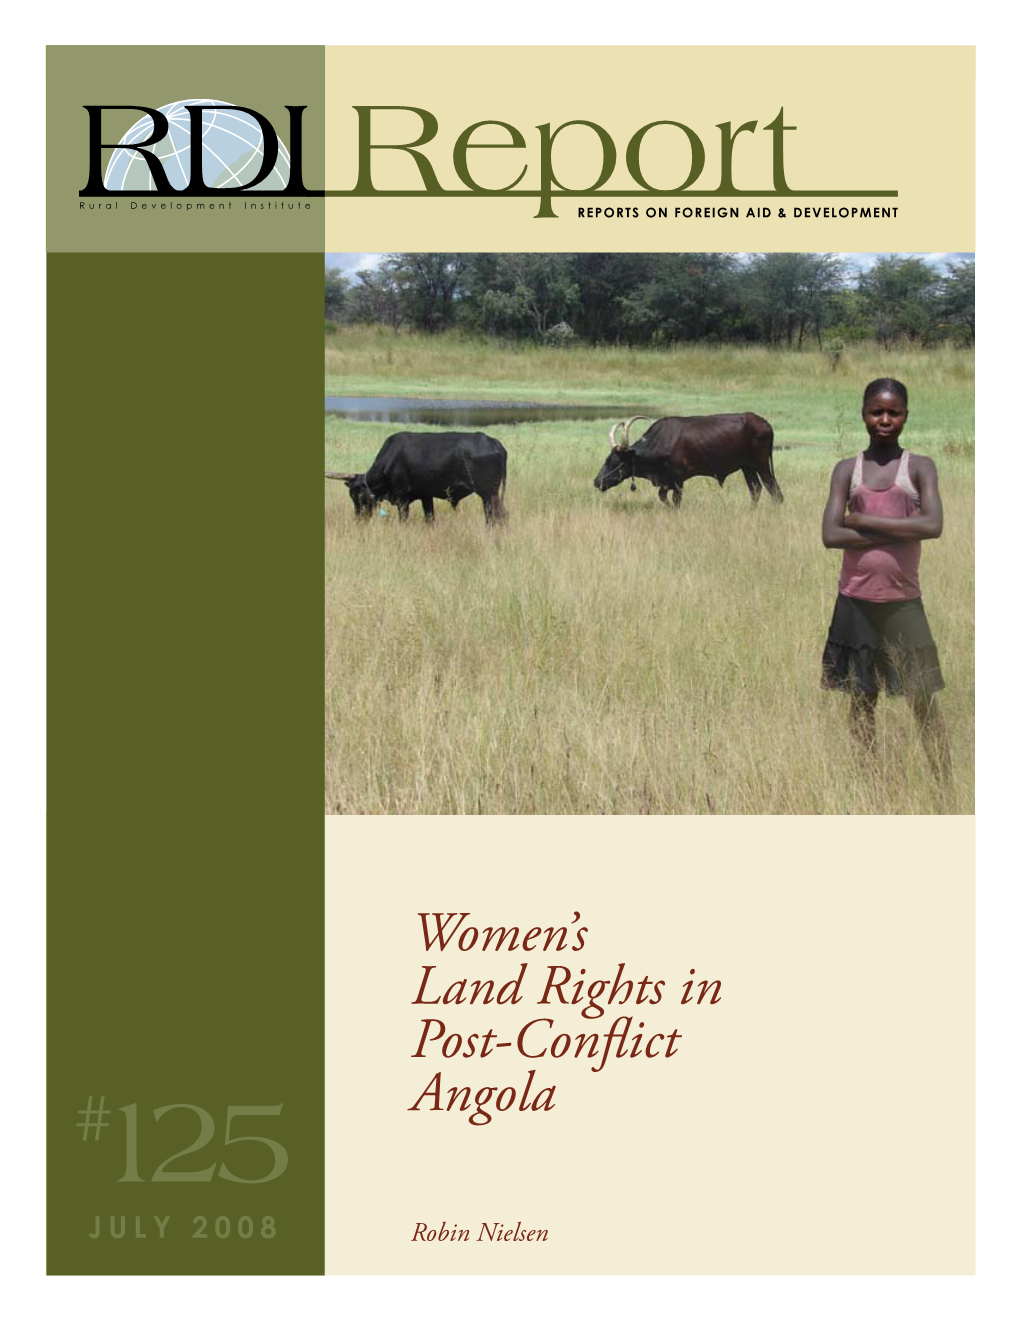 Women's Land Rights in Post-Conflict Angola